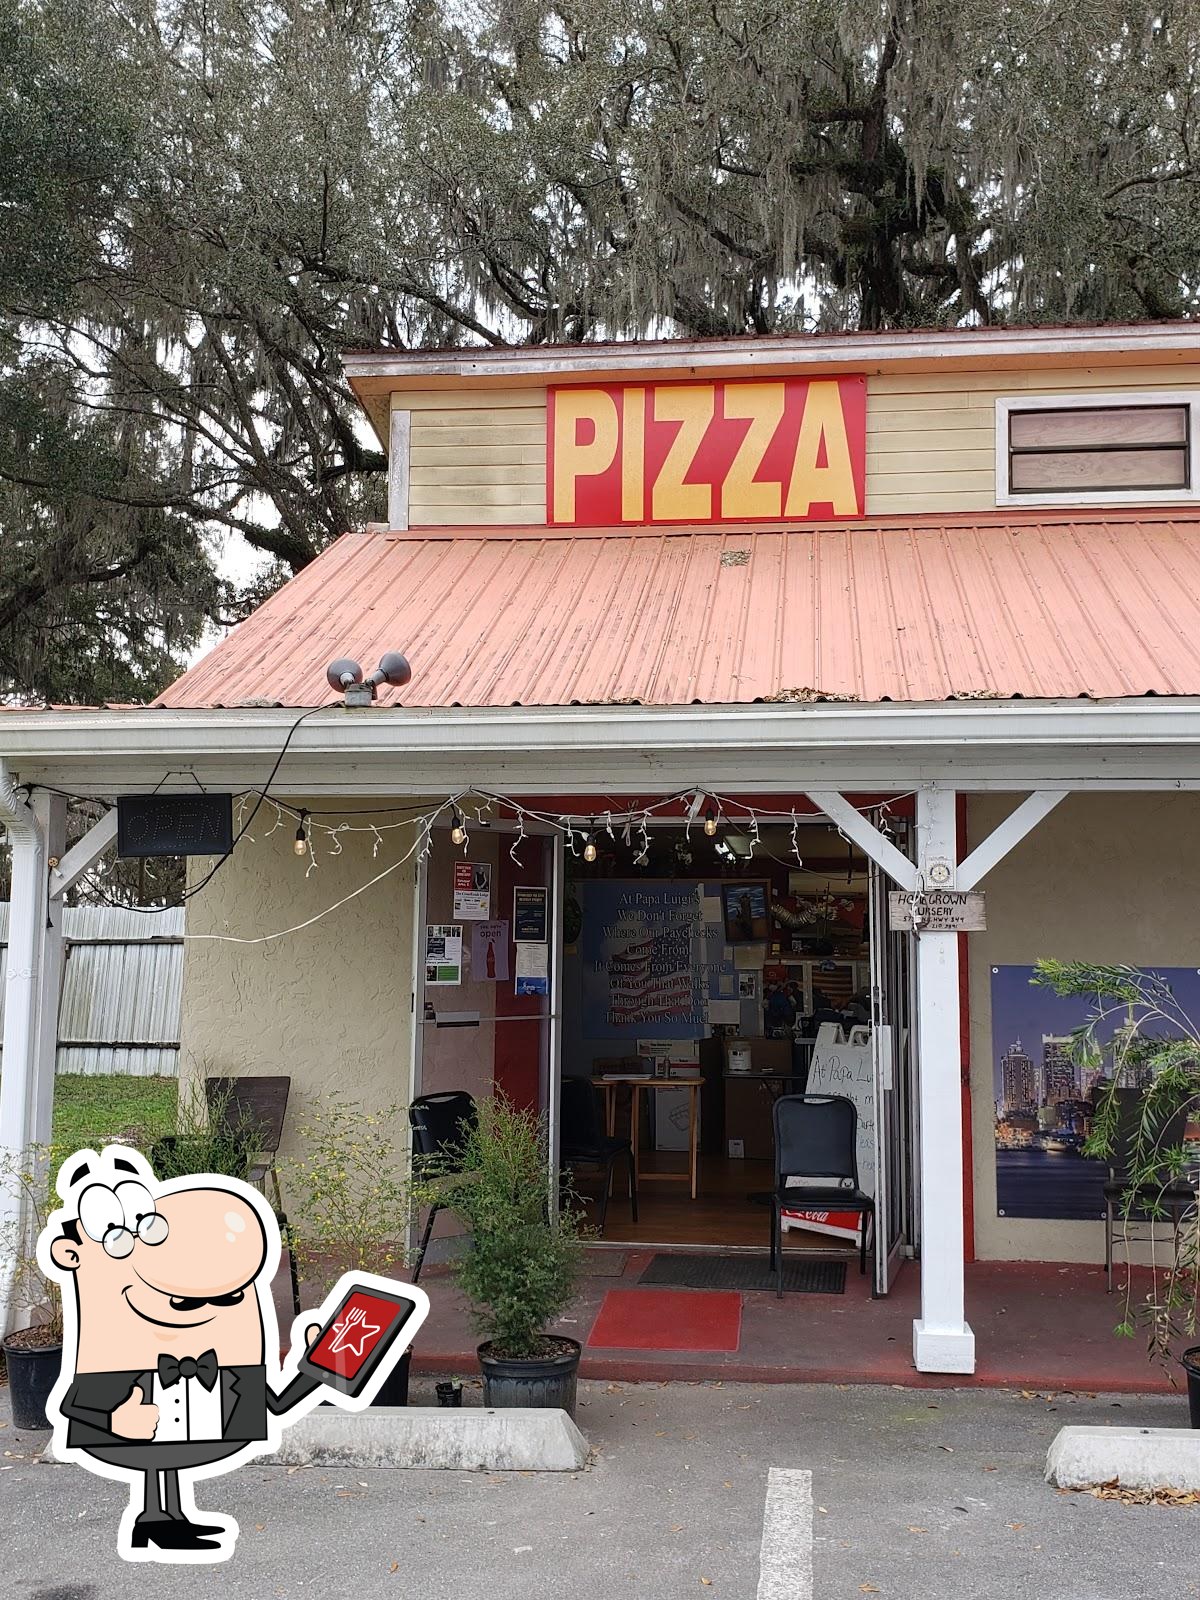 PAPA LUIGI'S - 16 Reviews - 143 SE Hwy 349, Old Town, Florida - Pizza -  Restaurant Reviews - Phone Number - Yelp